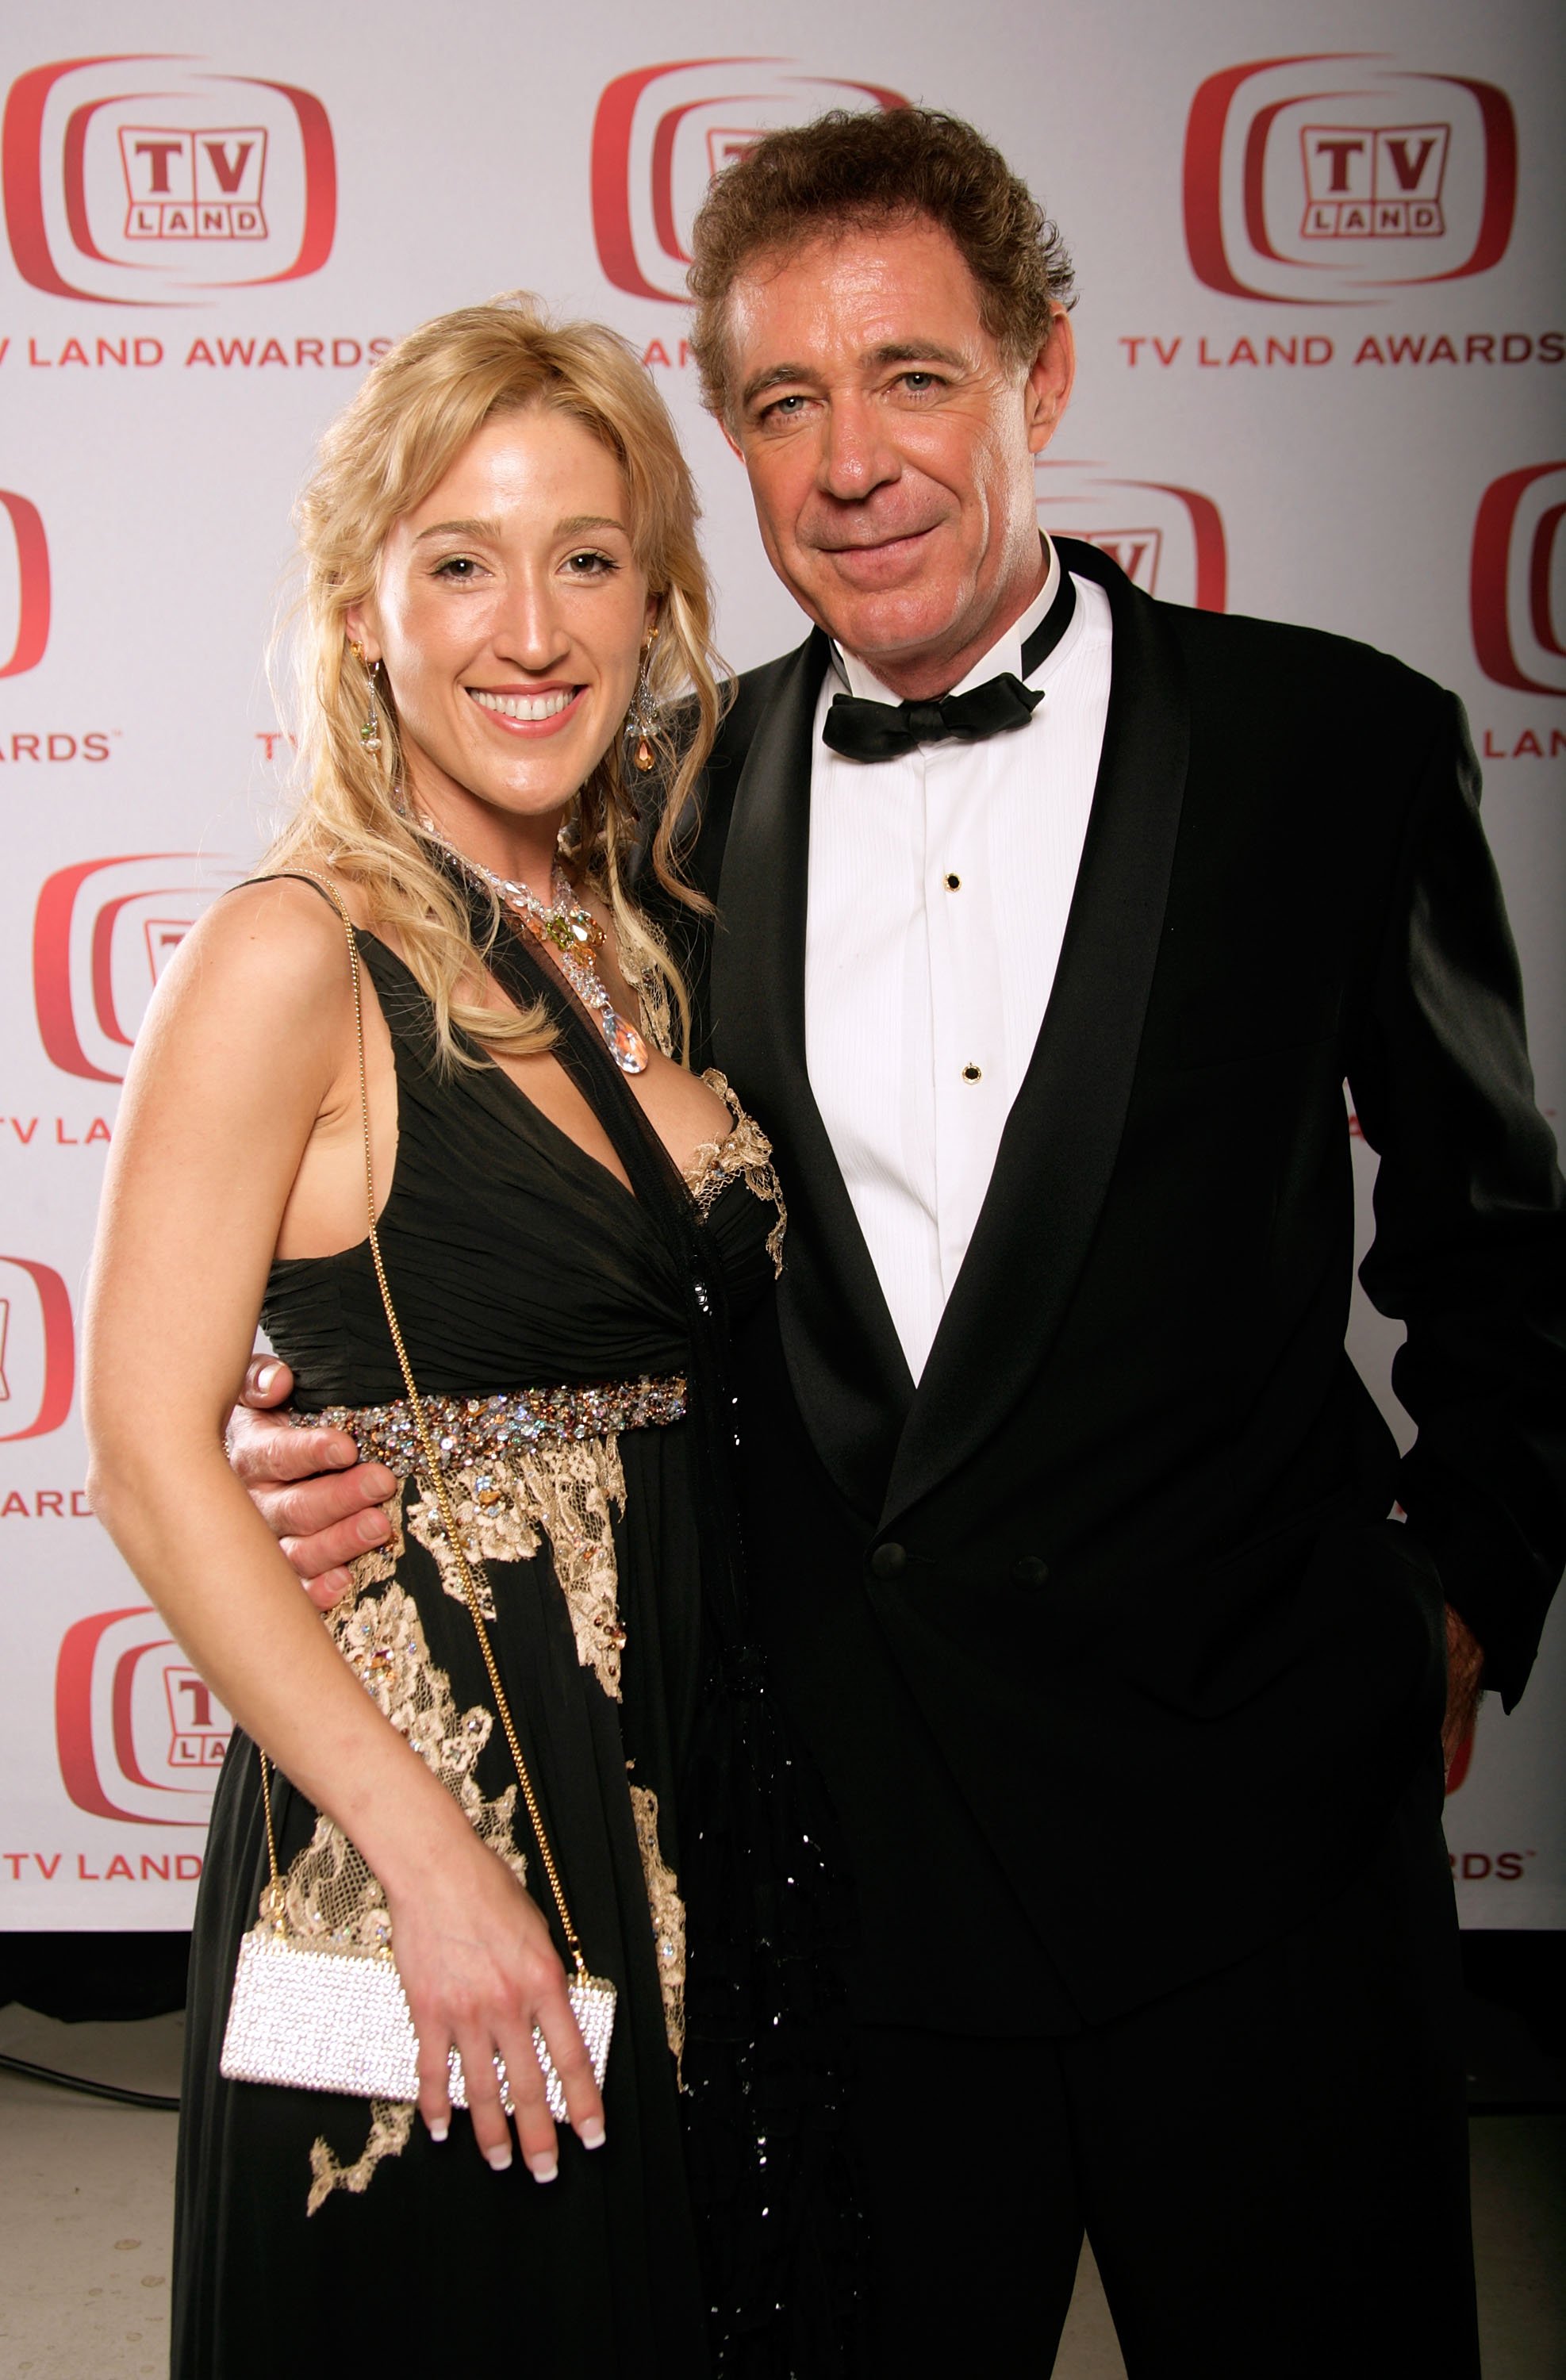 Barry Williams and Elizabeth Kennedy at the 6th annual "TV Land Awards" held at Barker Hangar on June 8, 2008. | Photo: GettyImages